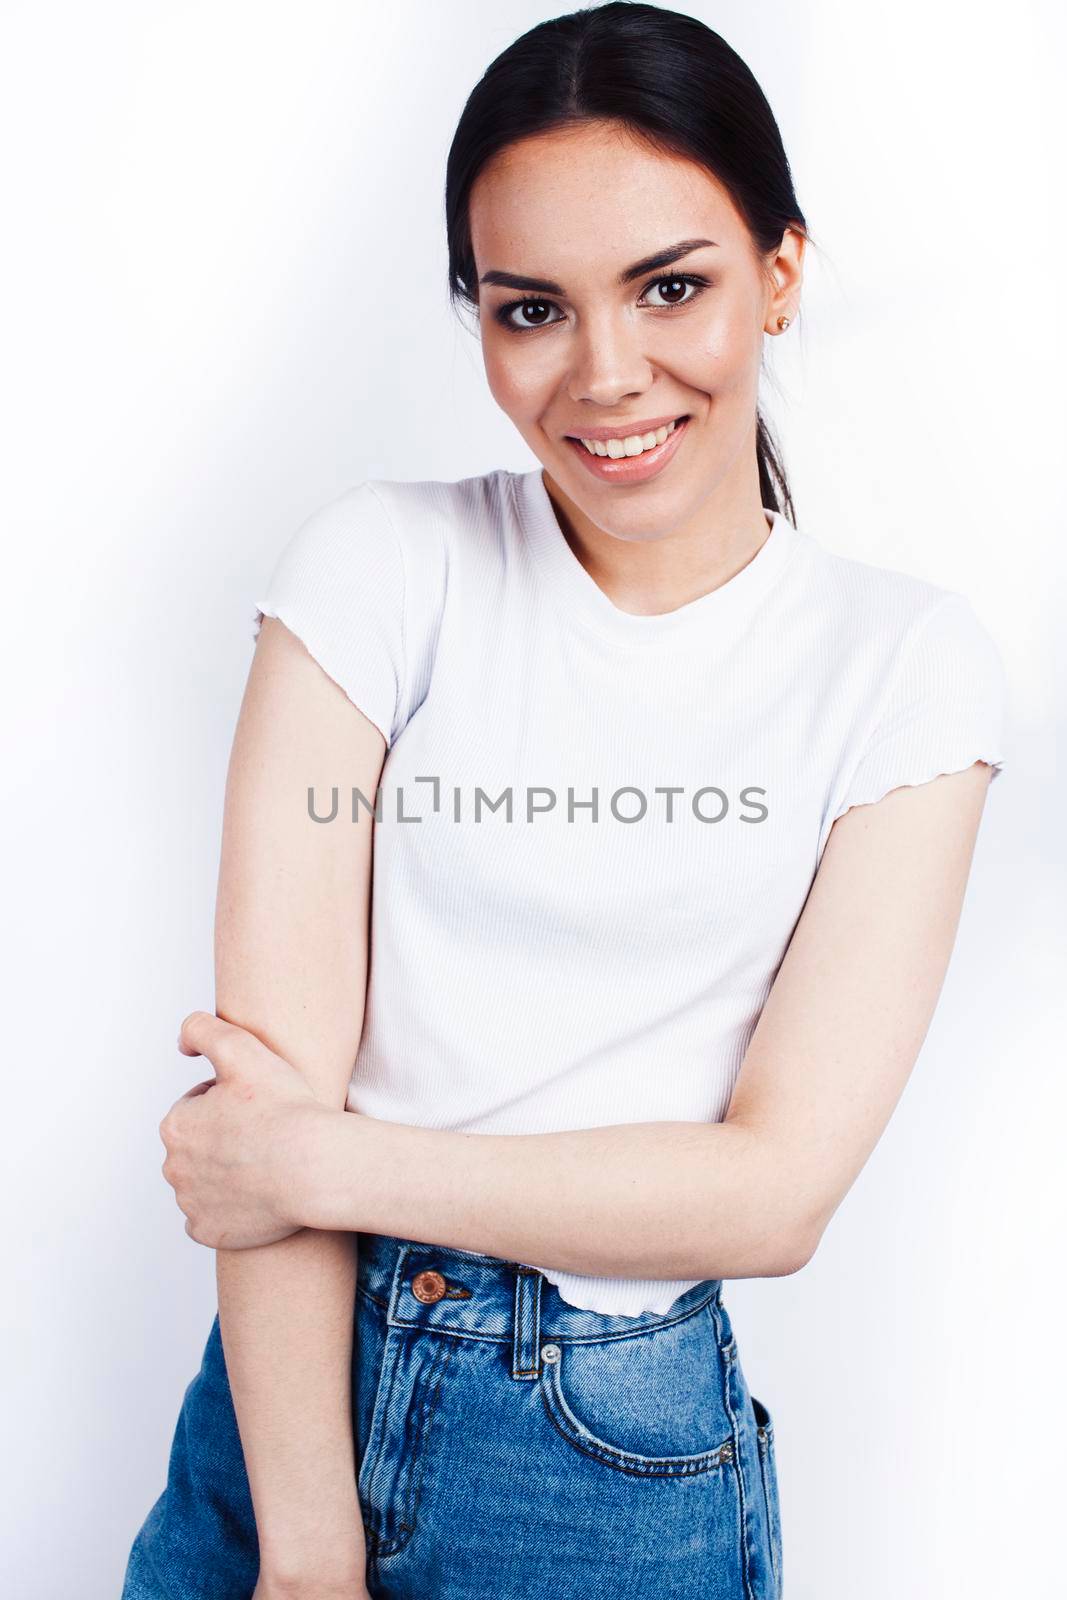 young happy smiling latin american teenage girl emotional posing isolated on white background, lifestyle people concept close up